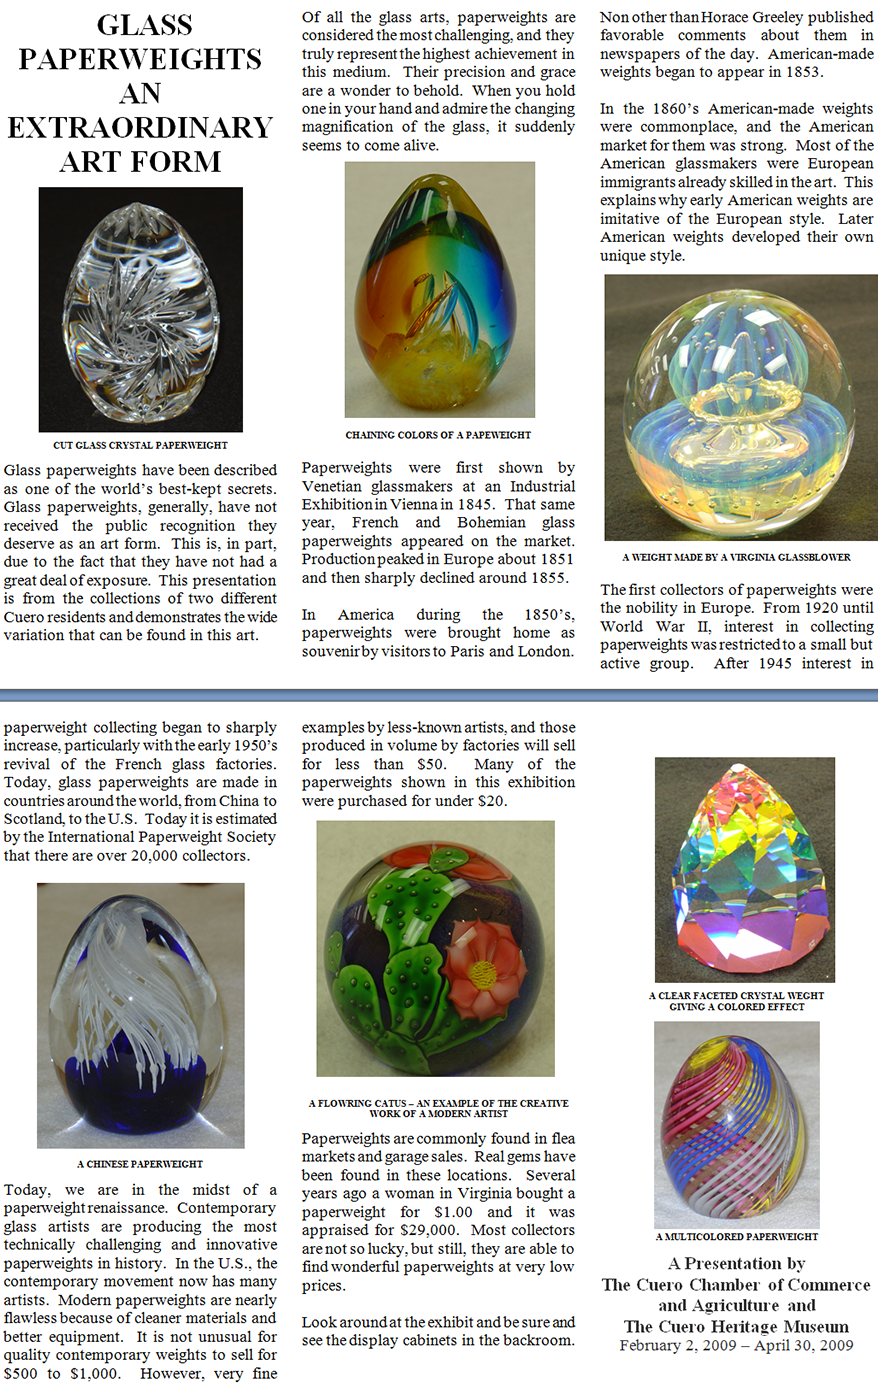 artistic glass paperweights permanent exhibit